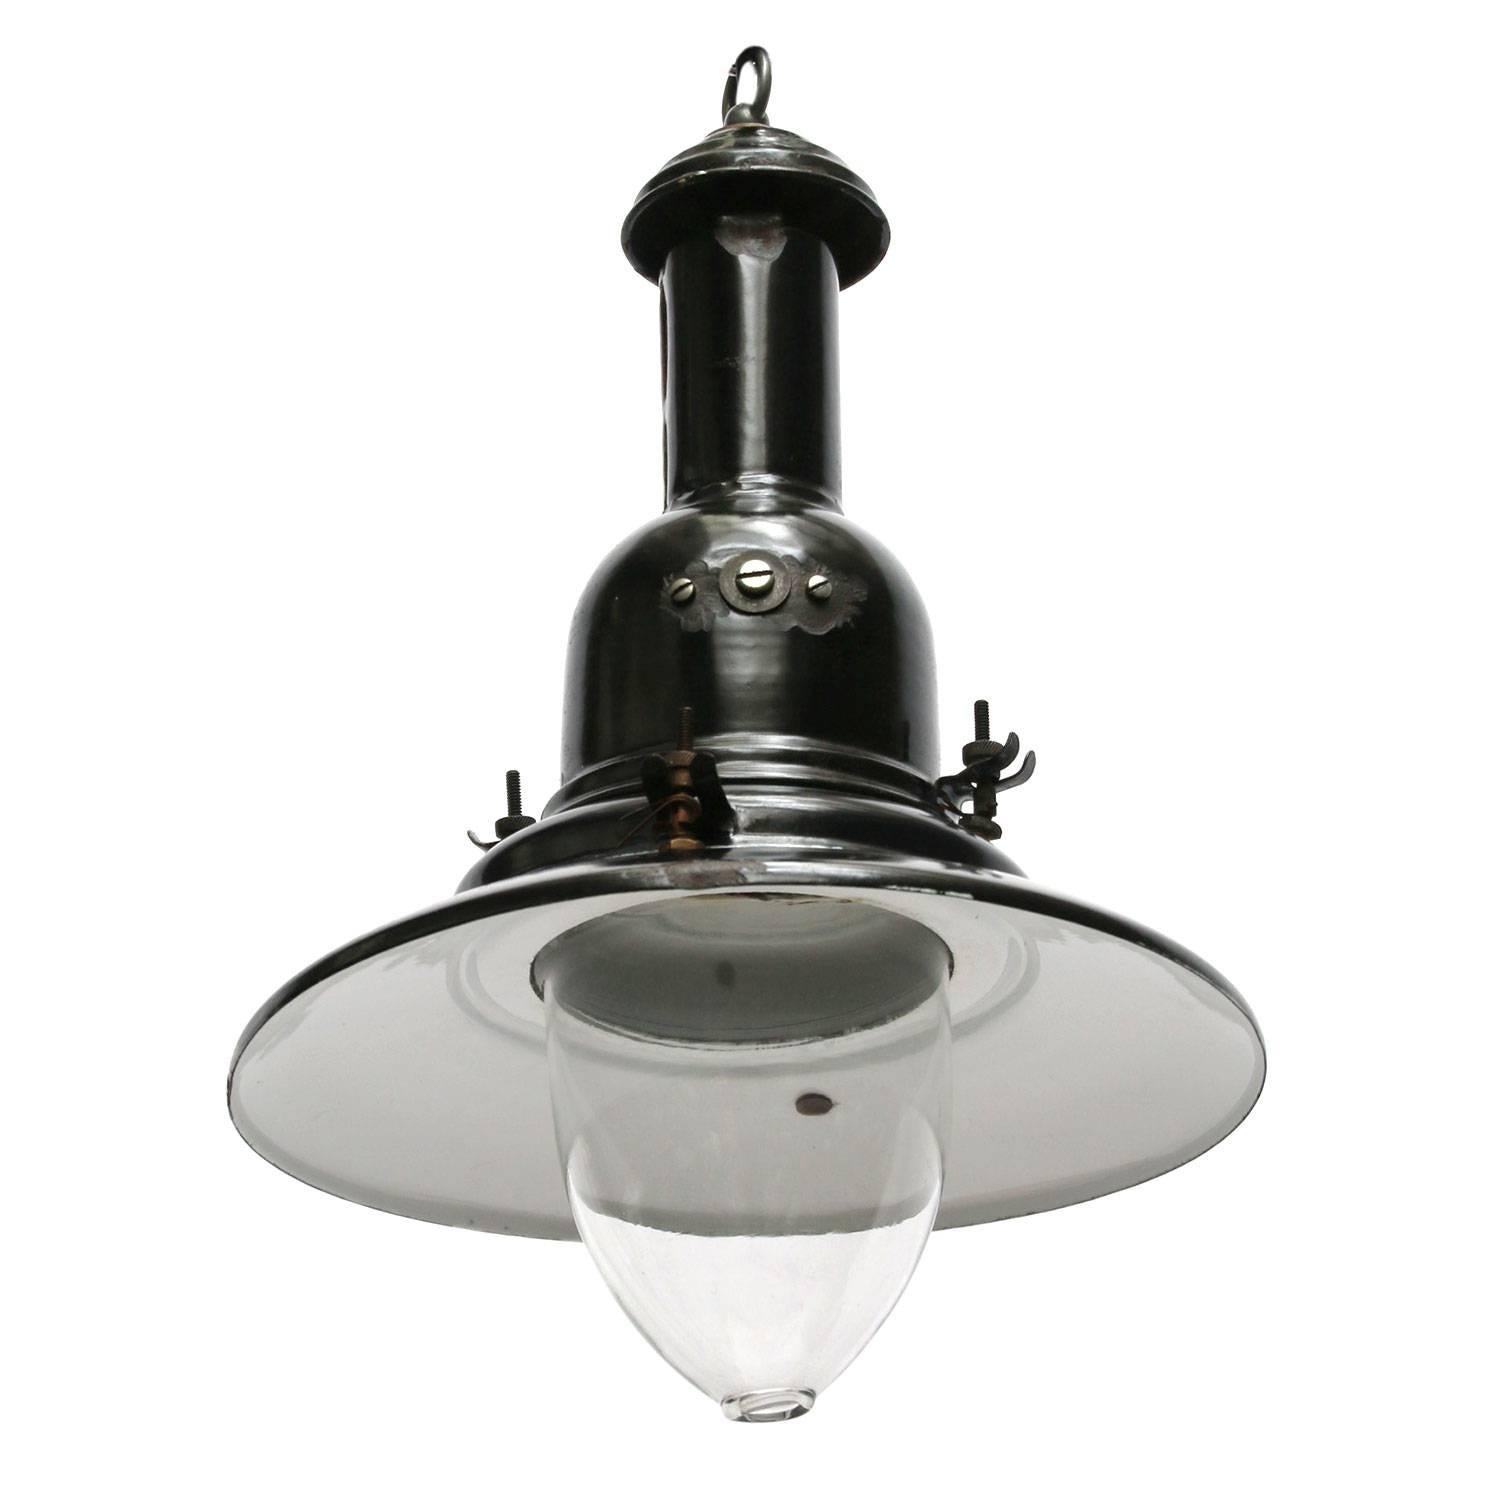 Greek fisherman’s light. Black enamel pendant light with clear glass. White interior. 

Weight: 1.4 kg / 3.1 lb

All lamps have been made suitable by international standards for incandescent light bulbs, energy-efficient and LED bulbs. E26/E27 bulb